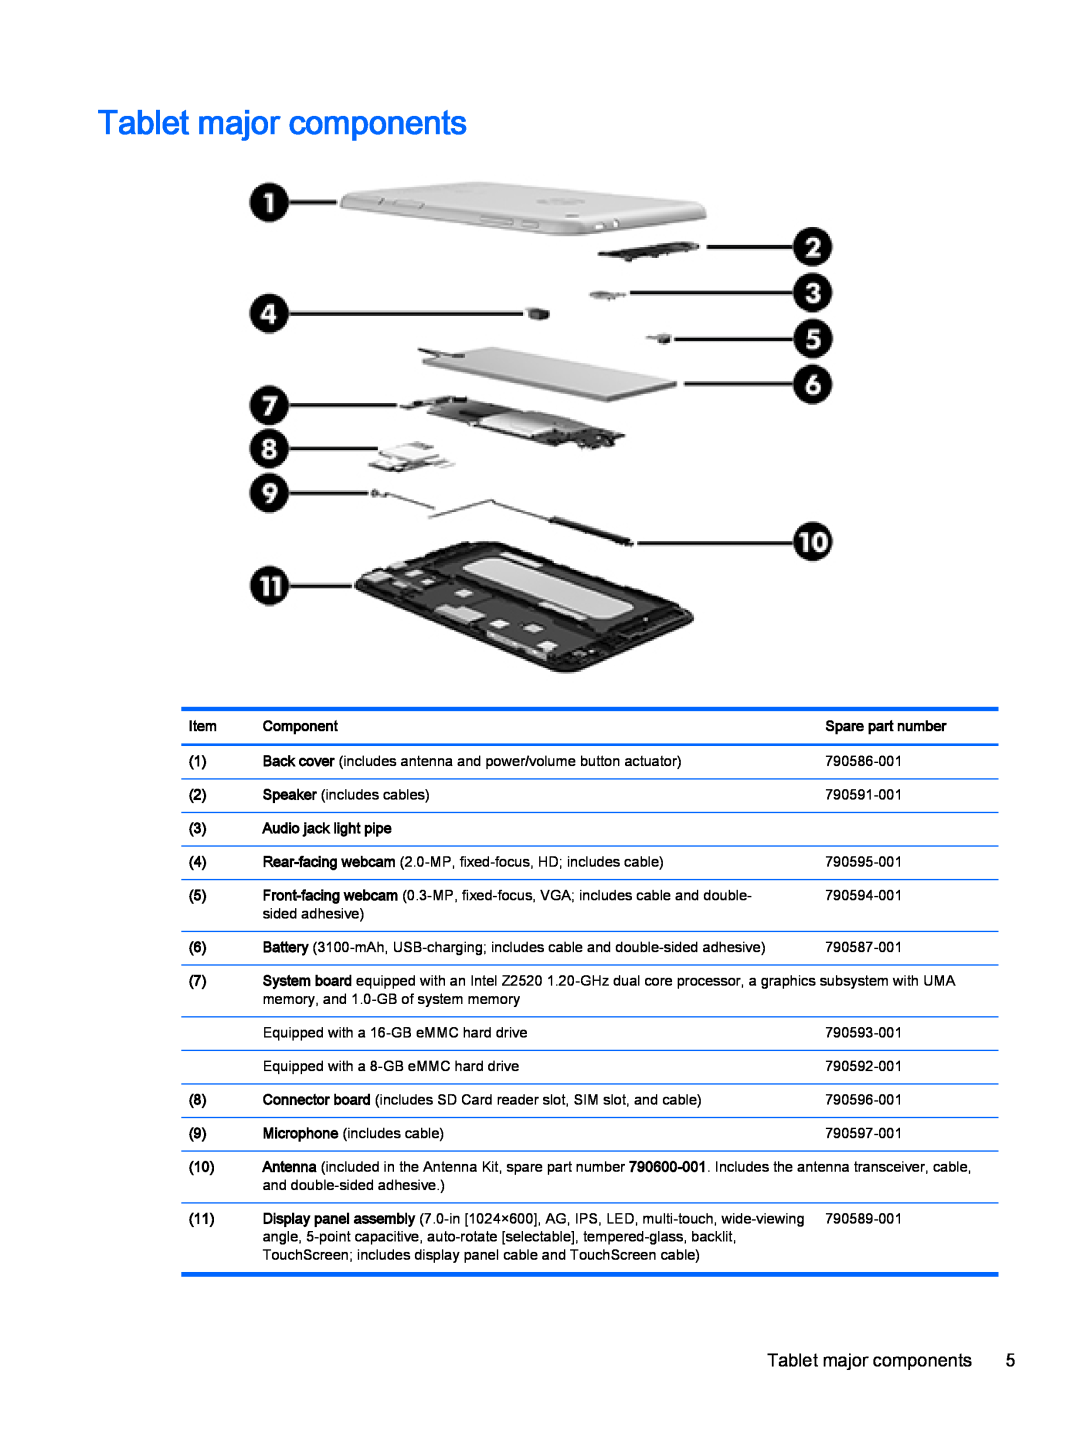 HP 7 Plus G2 - 1331 manual Tablet major components, Component, Spare part number, Audio jack light pipe 